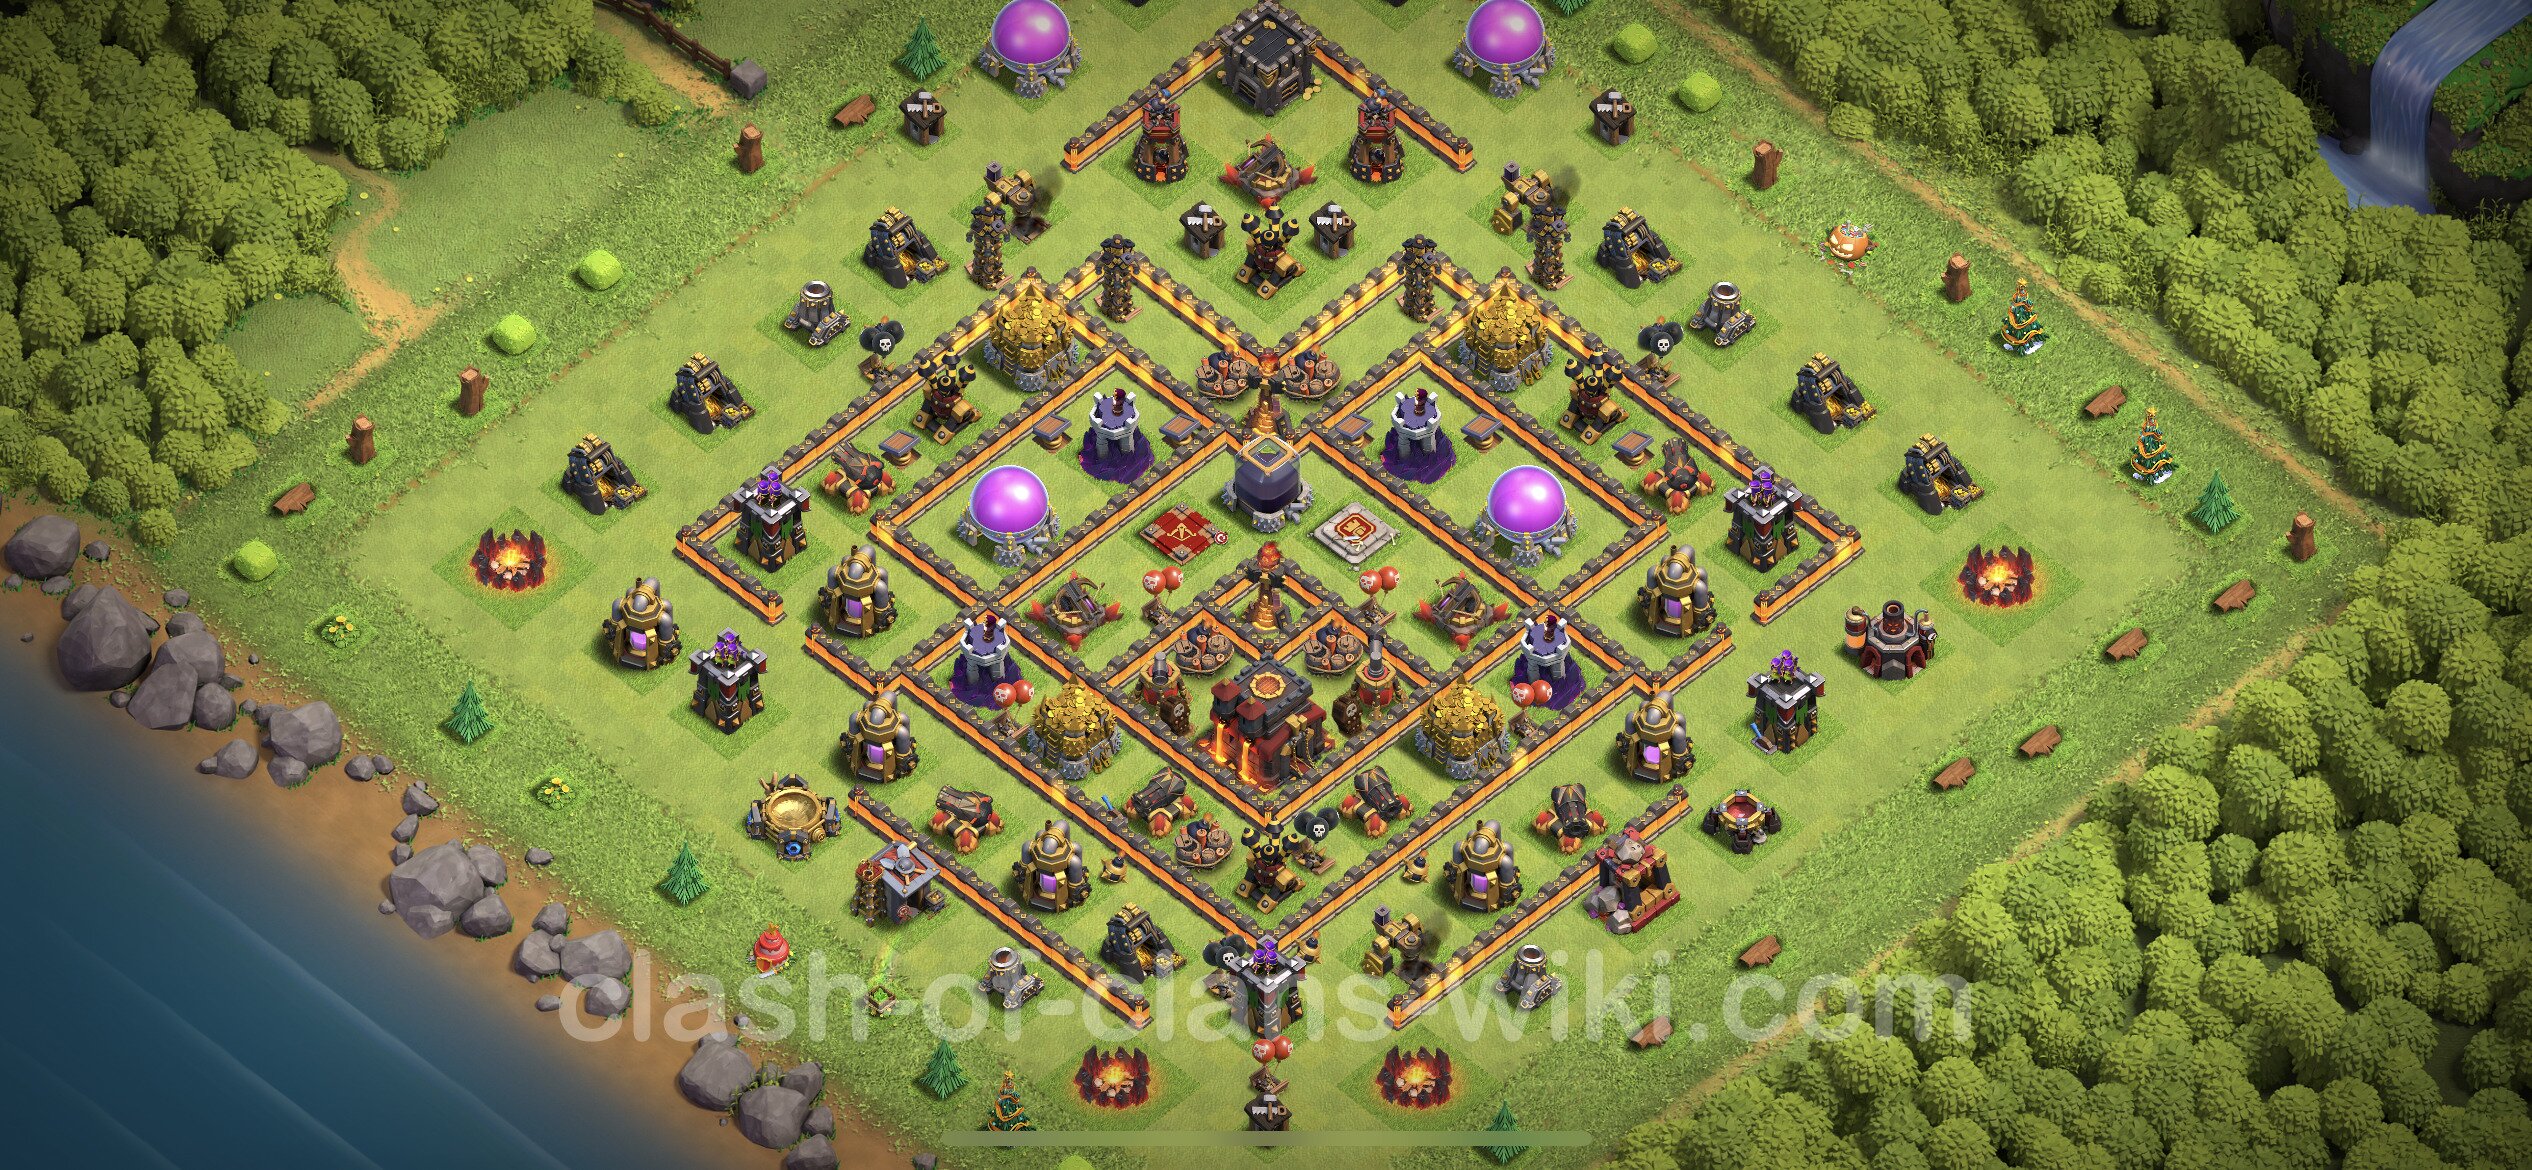 Farming Base TH10 Max Levels with Link - plan / layout / design - Clash of ...